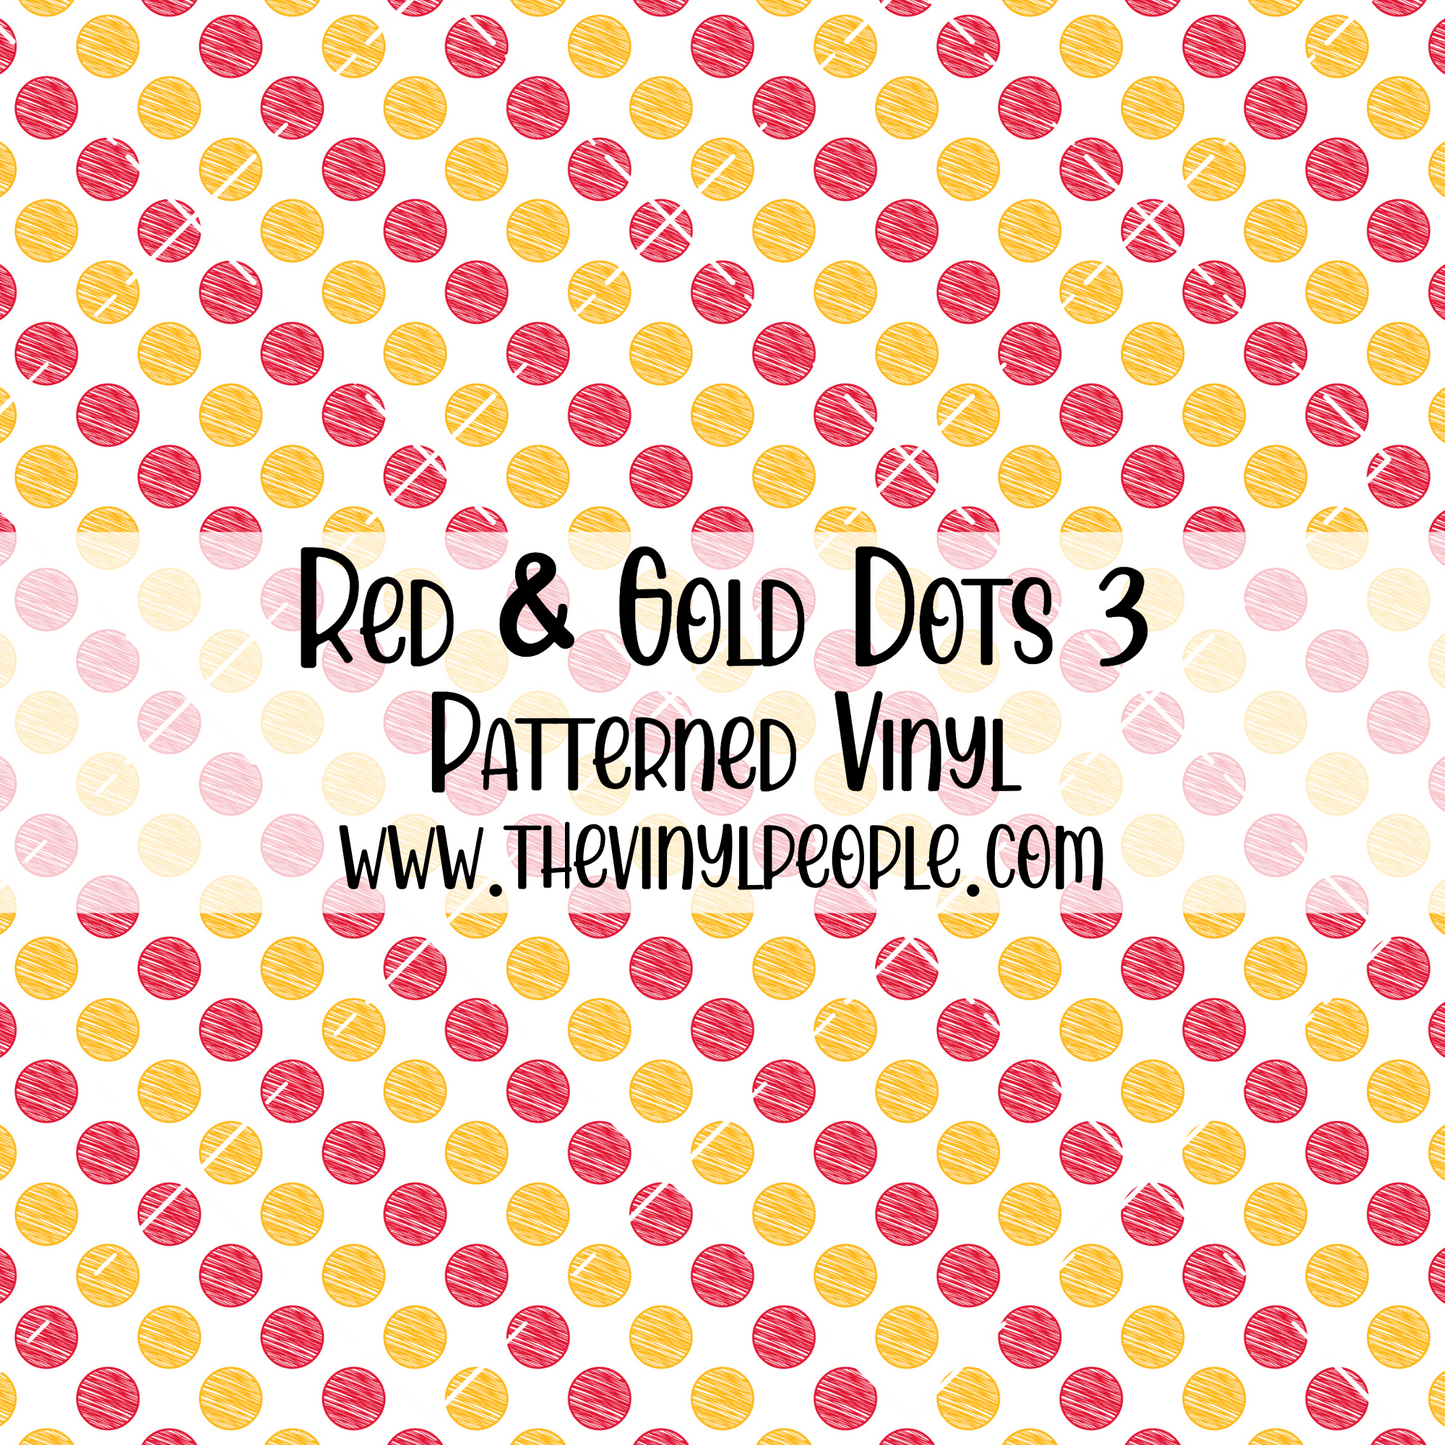 Red & Gold Dots Patterned Vinyl